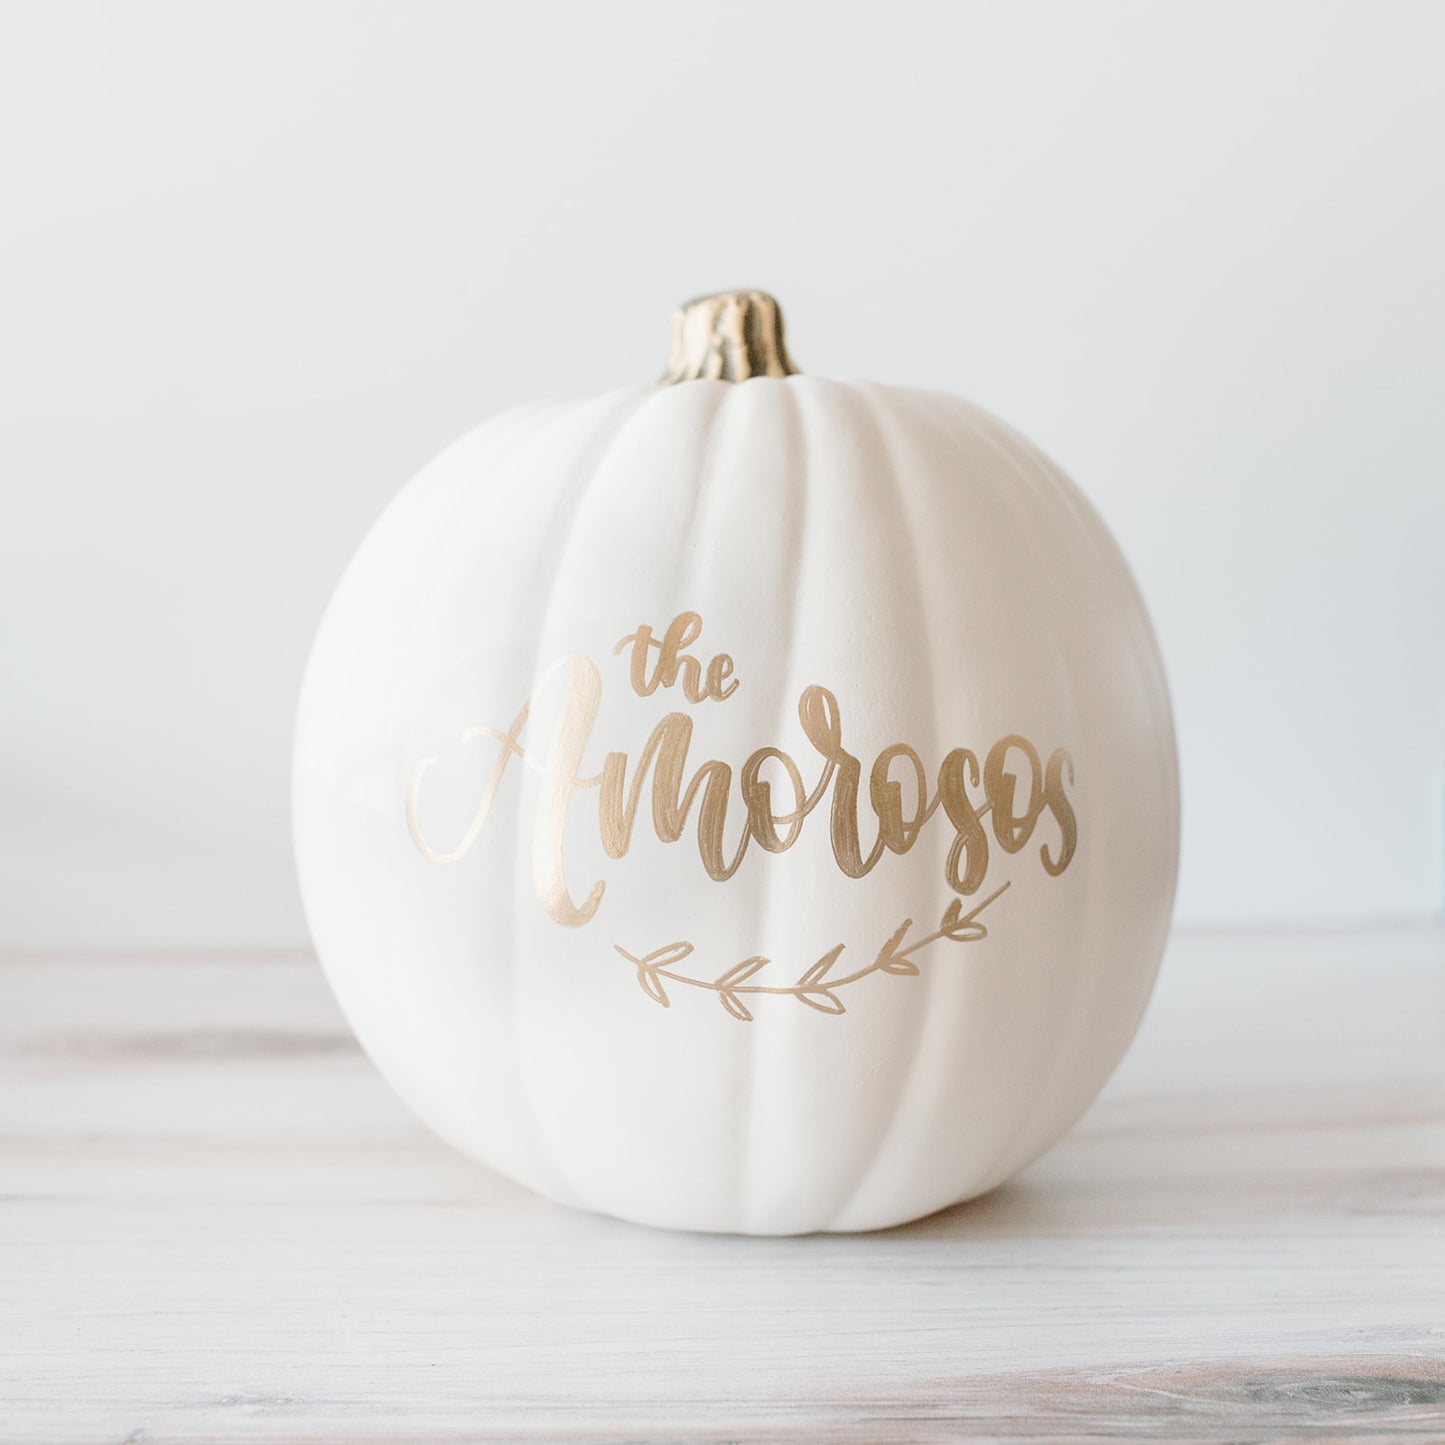 Load image into Gallery viewer, Personalized Pumpkins
